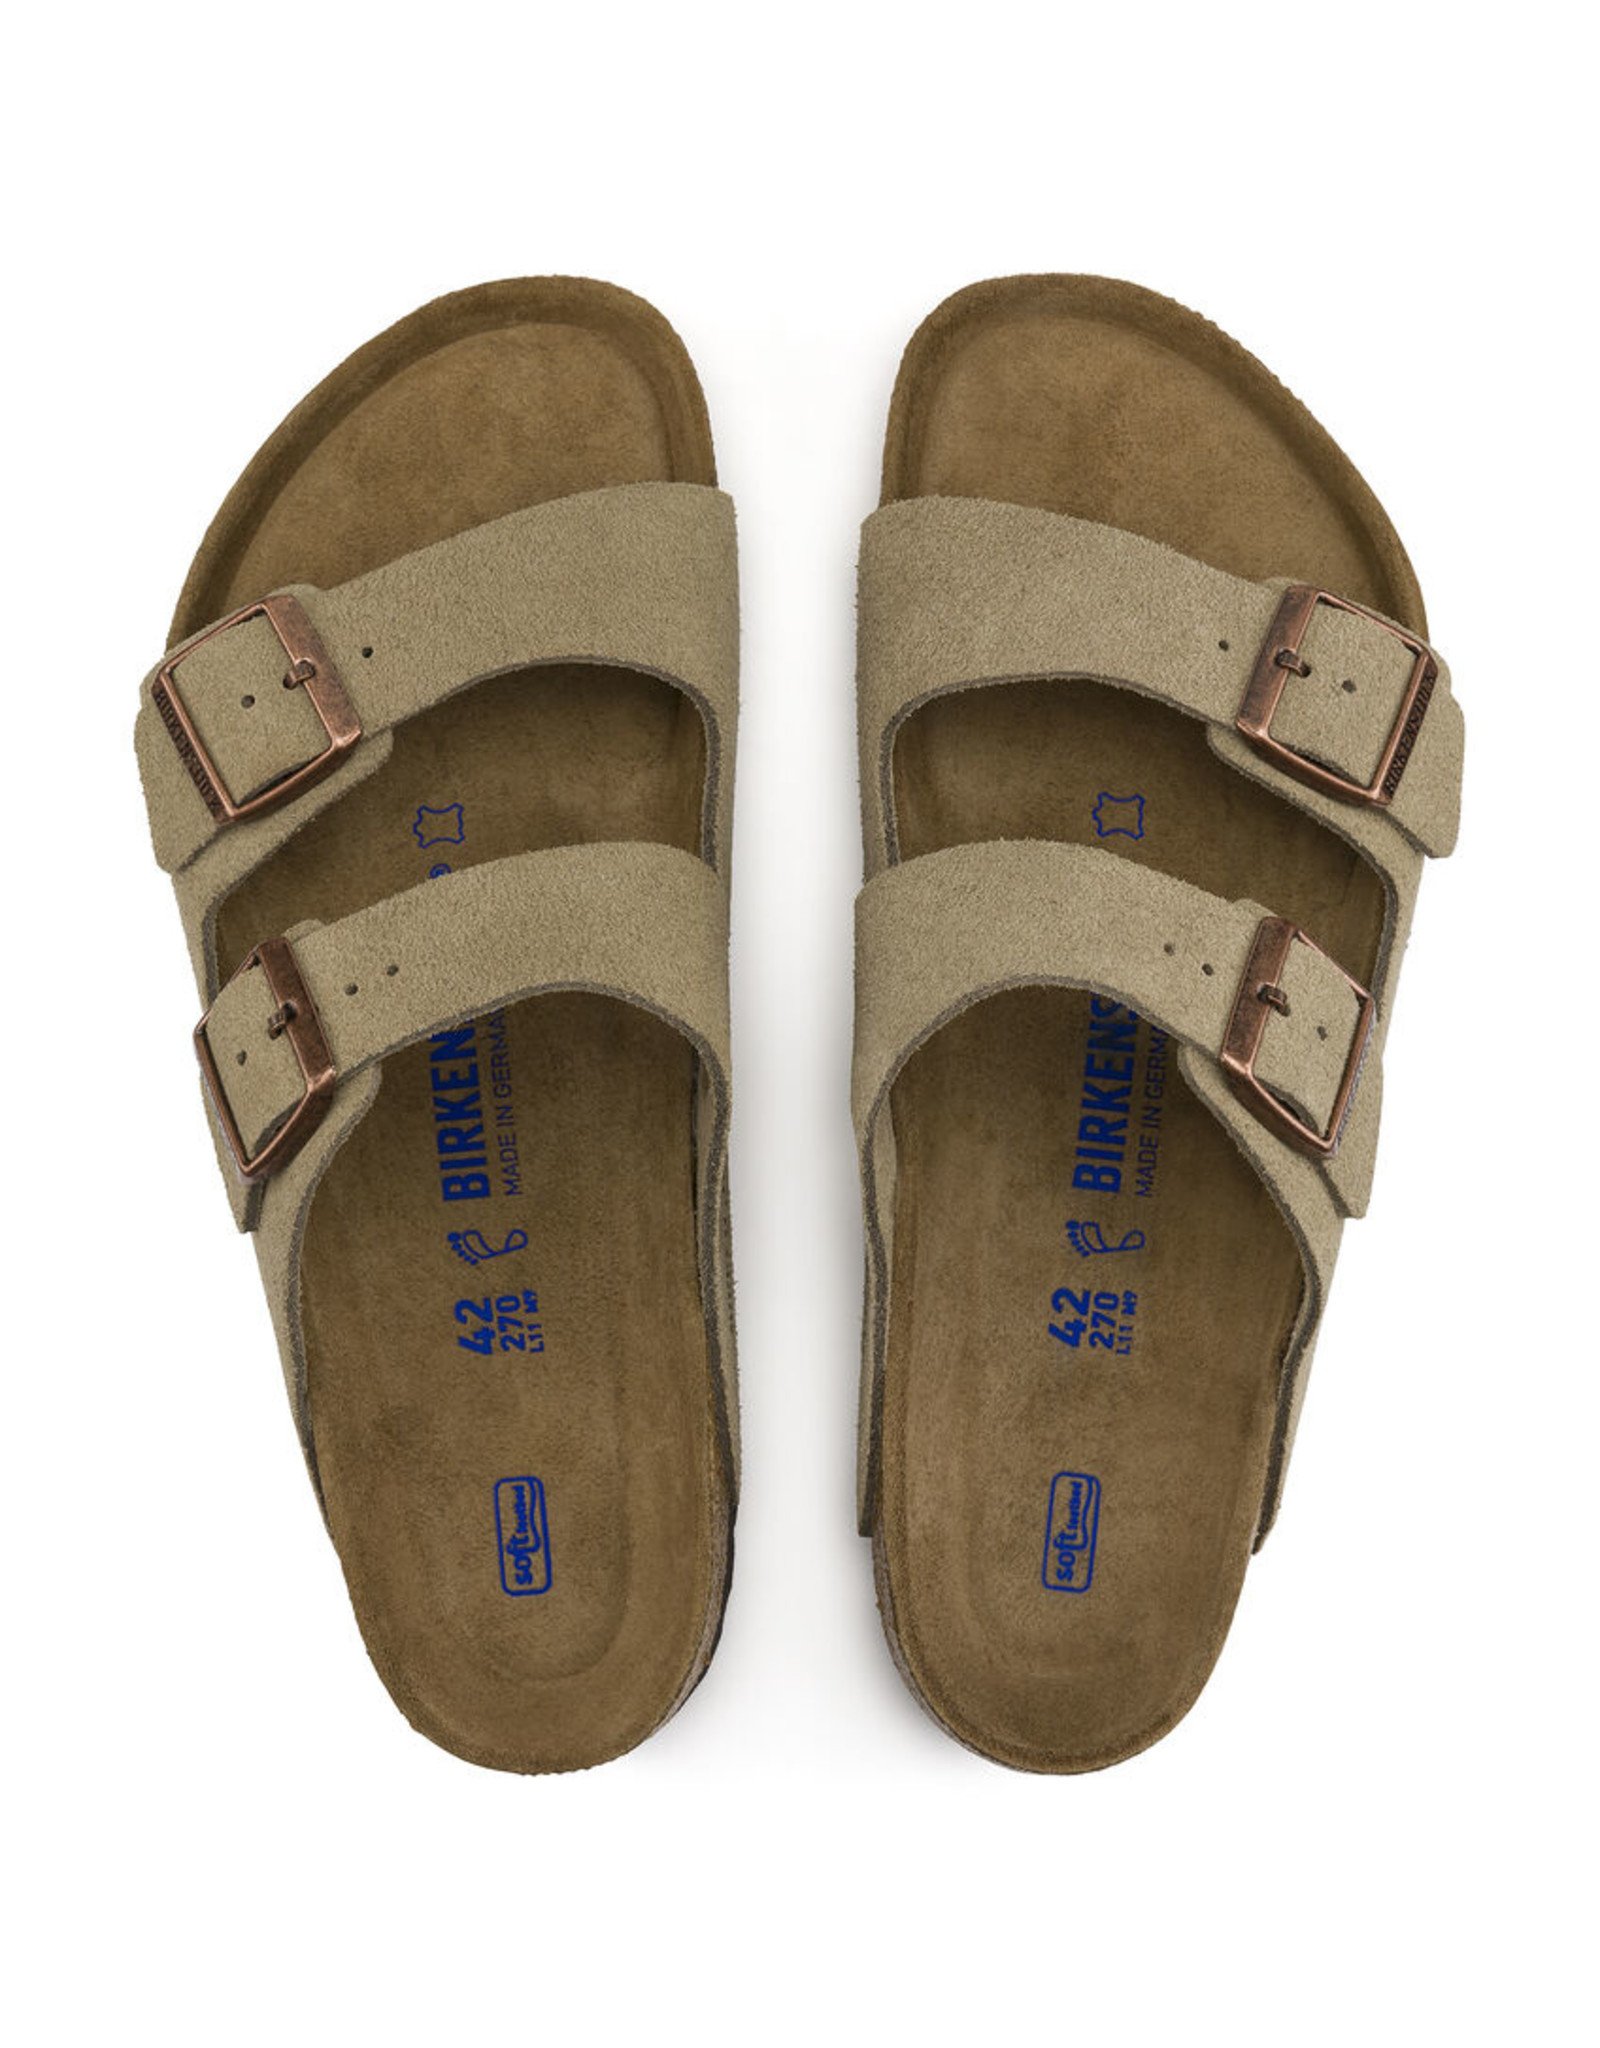 BIRKENSTOCK ARIZONA SOFT FOOTBED SUEDE LEATHER-TAUPE